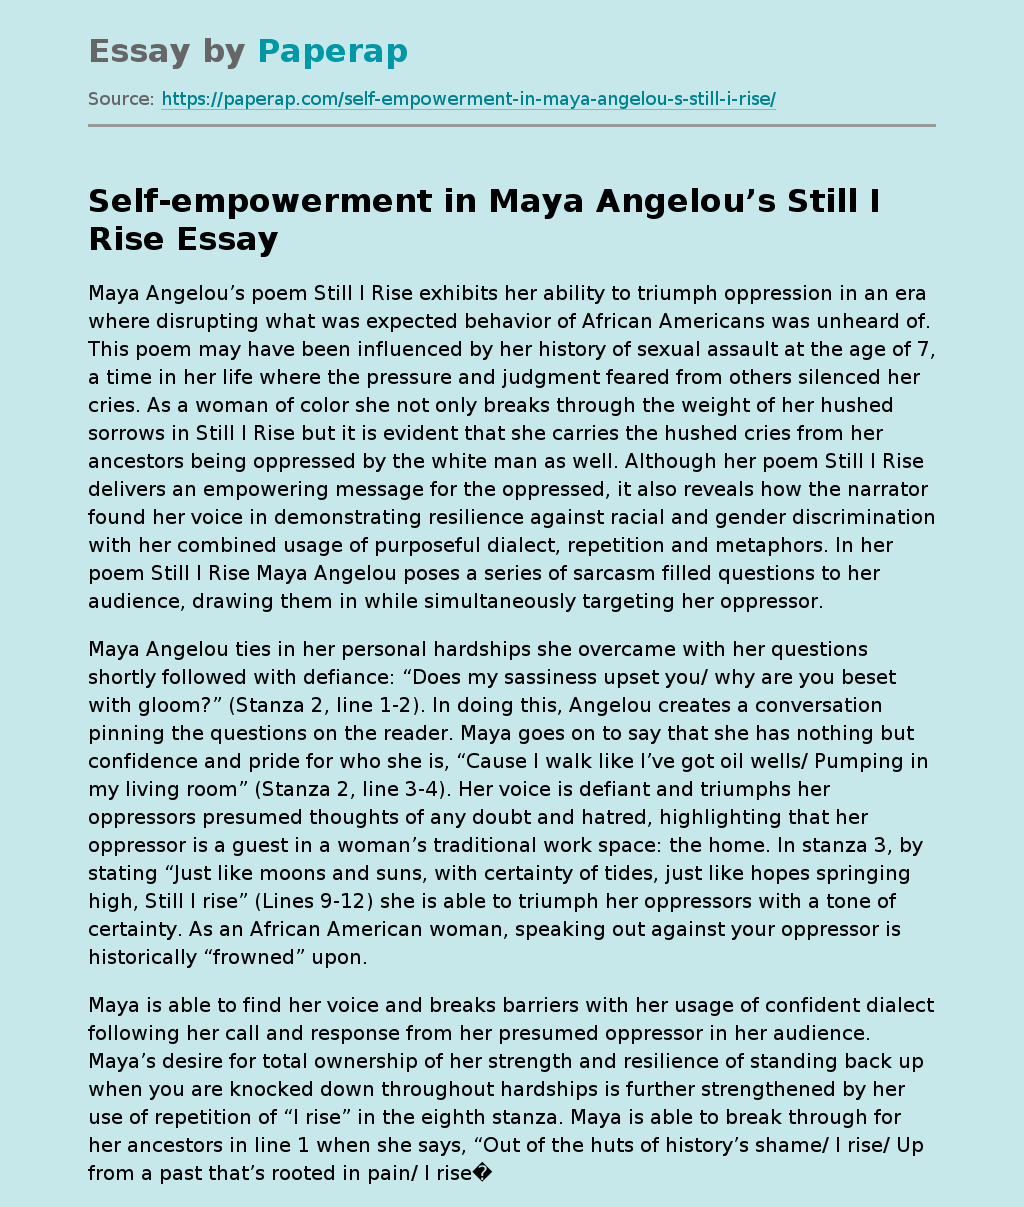 Self-empowerment in Maya Angelou’s Still I Rise